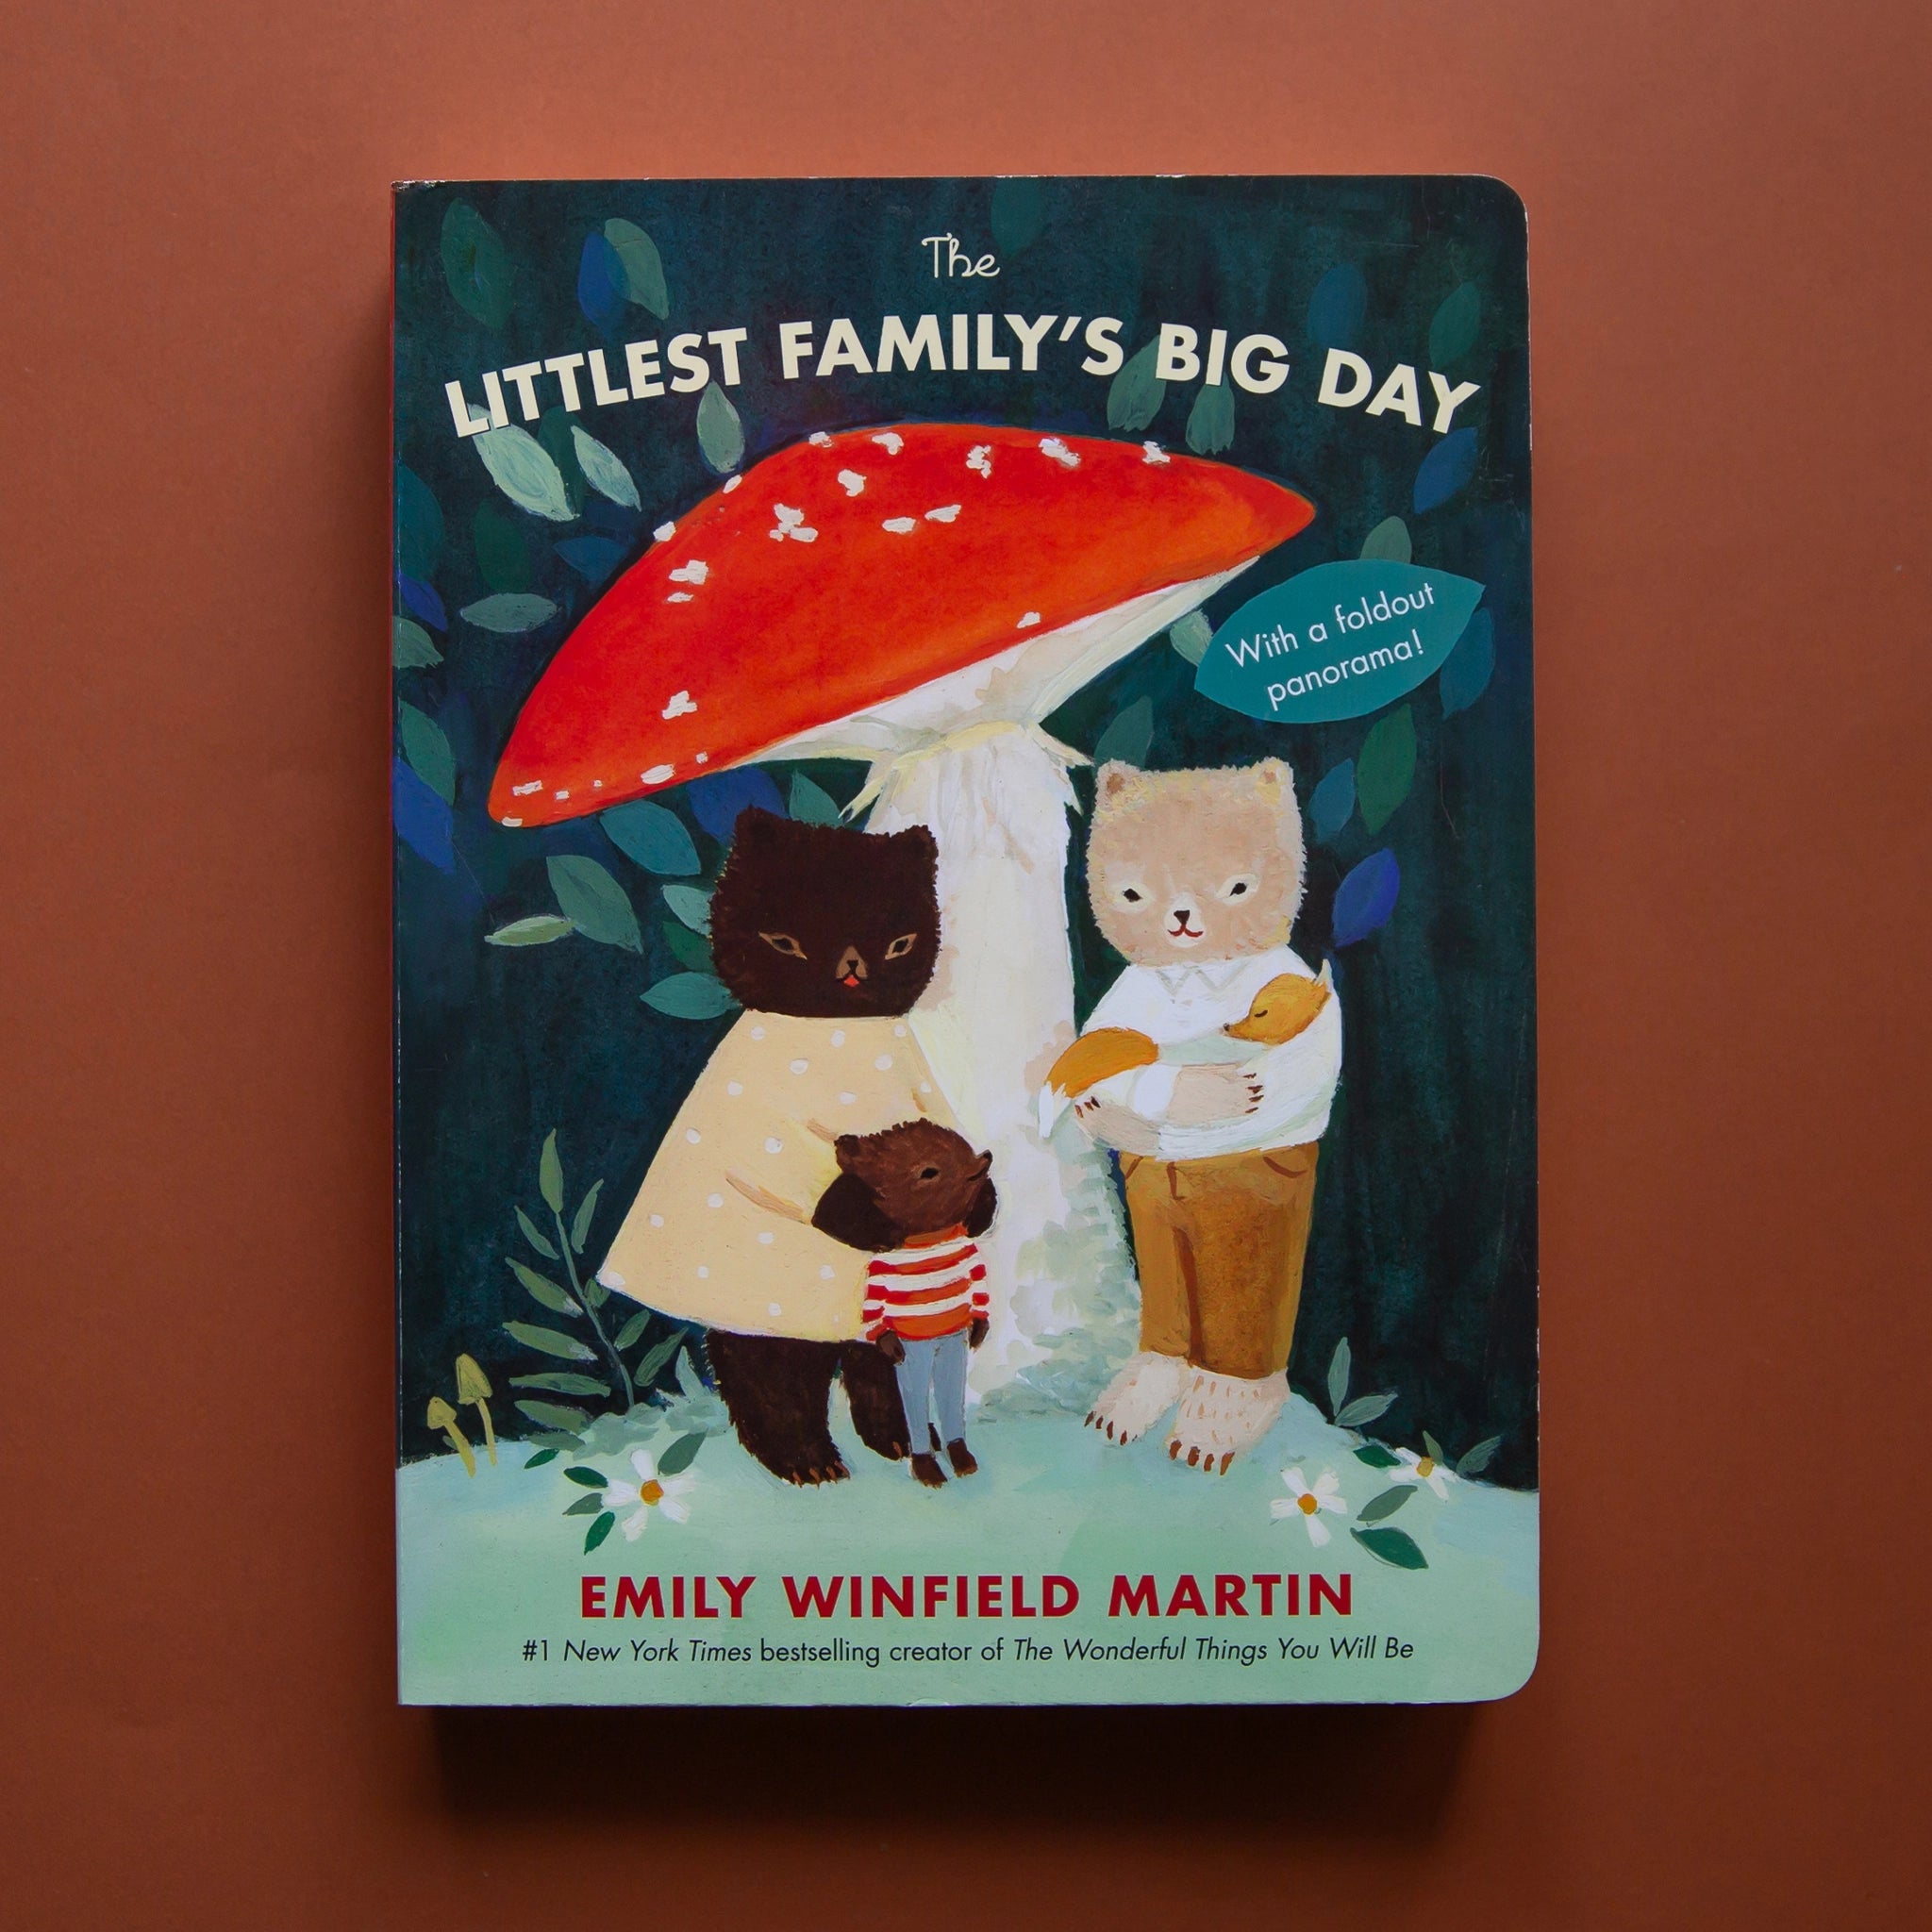 On a brown background is a green children's book cover with a small bear family standing under a red mushroom and the title above it that reads, "The Littlest Family's Biggest Day".